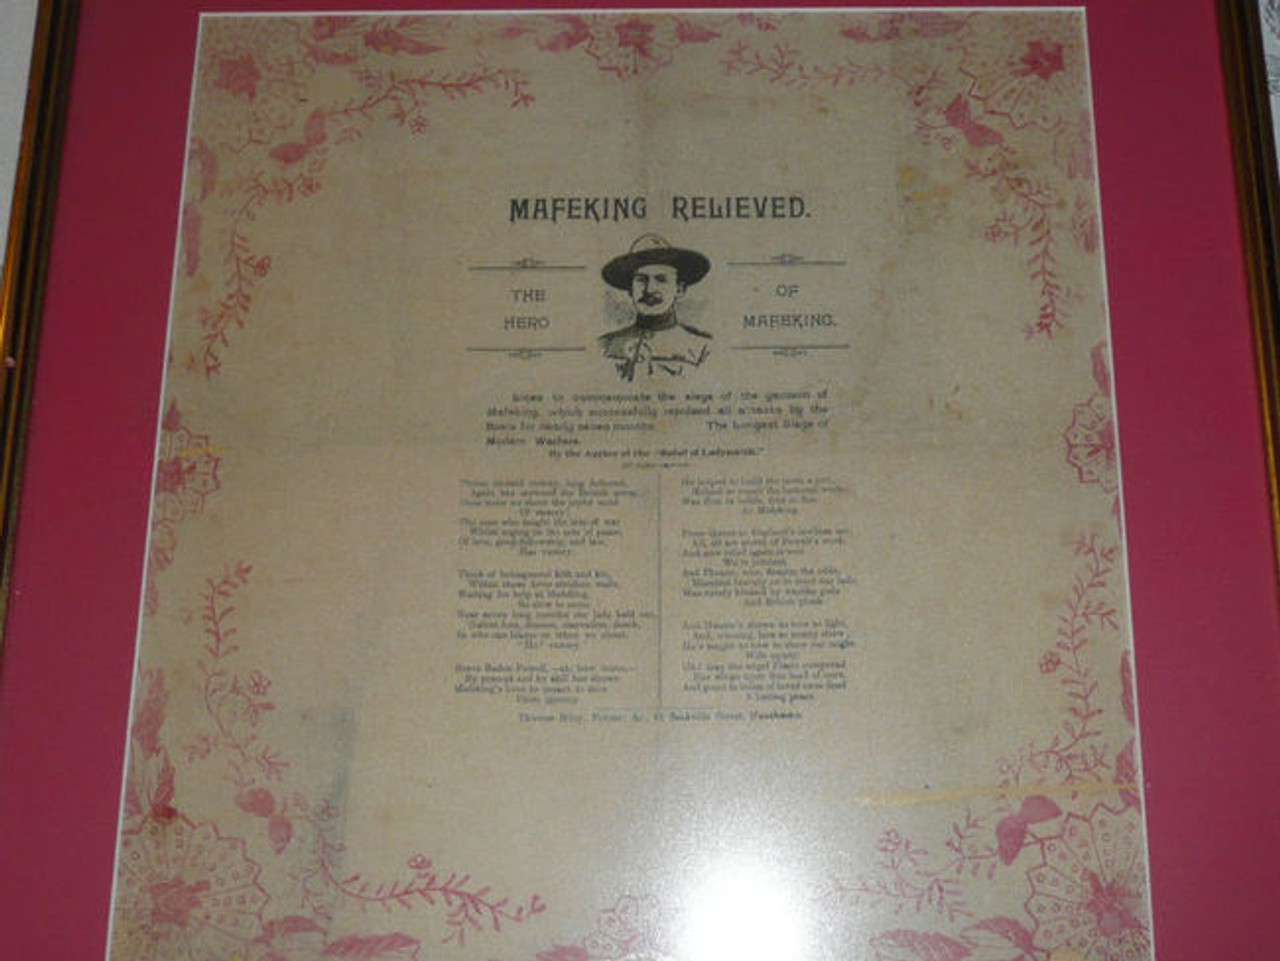 1900 Mafeking Relieved, Tribute to Baden Powell, Printed on silk/tissue, framed